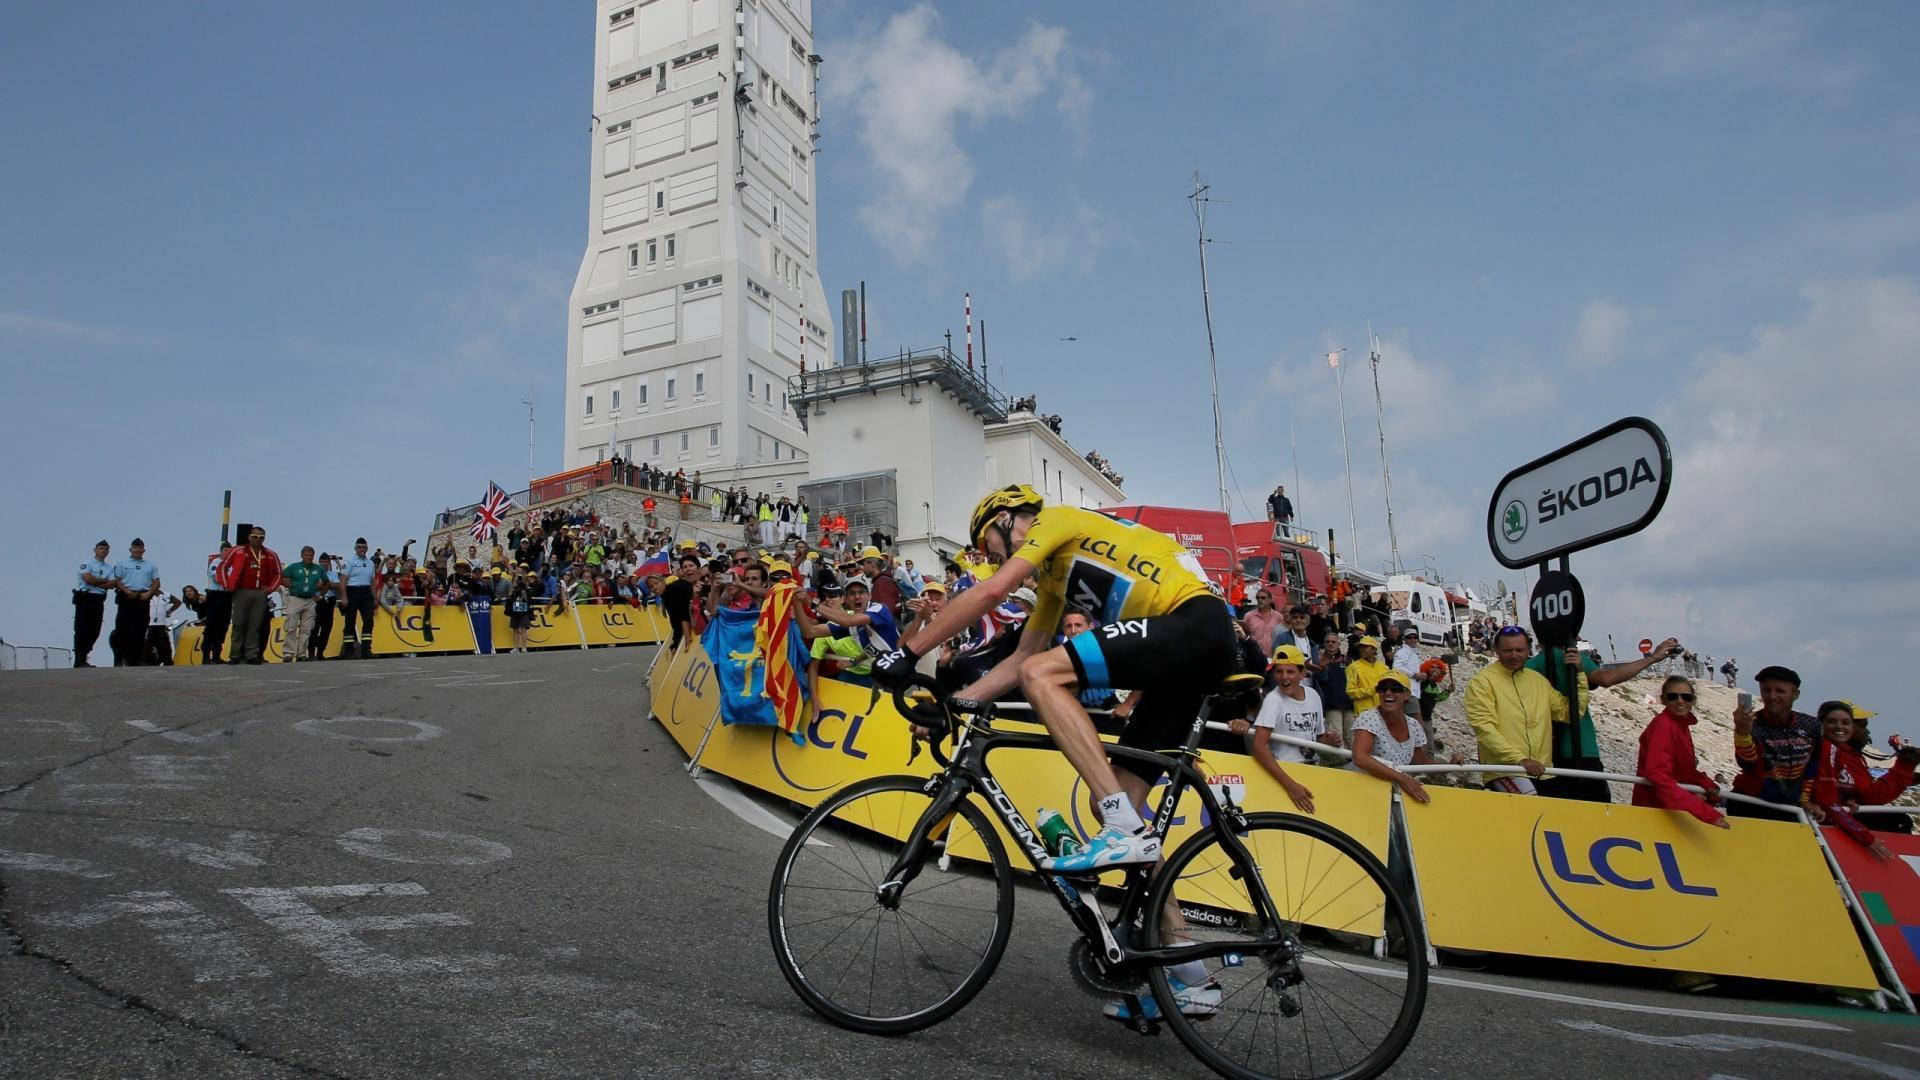 Intense Uphill Challenge At The Tour De France Background